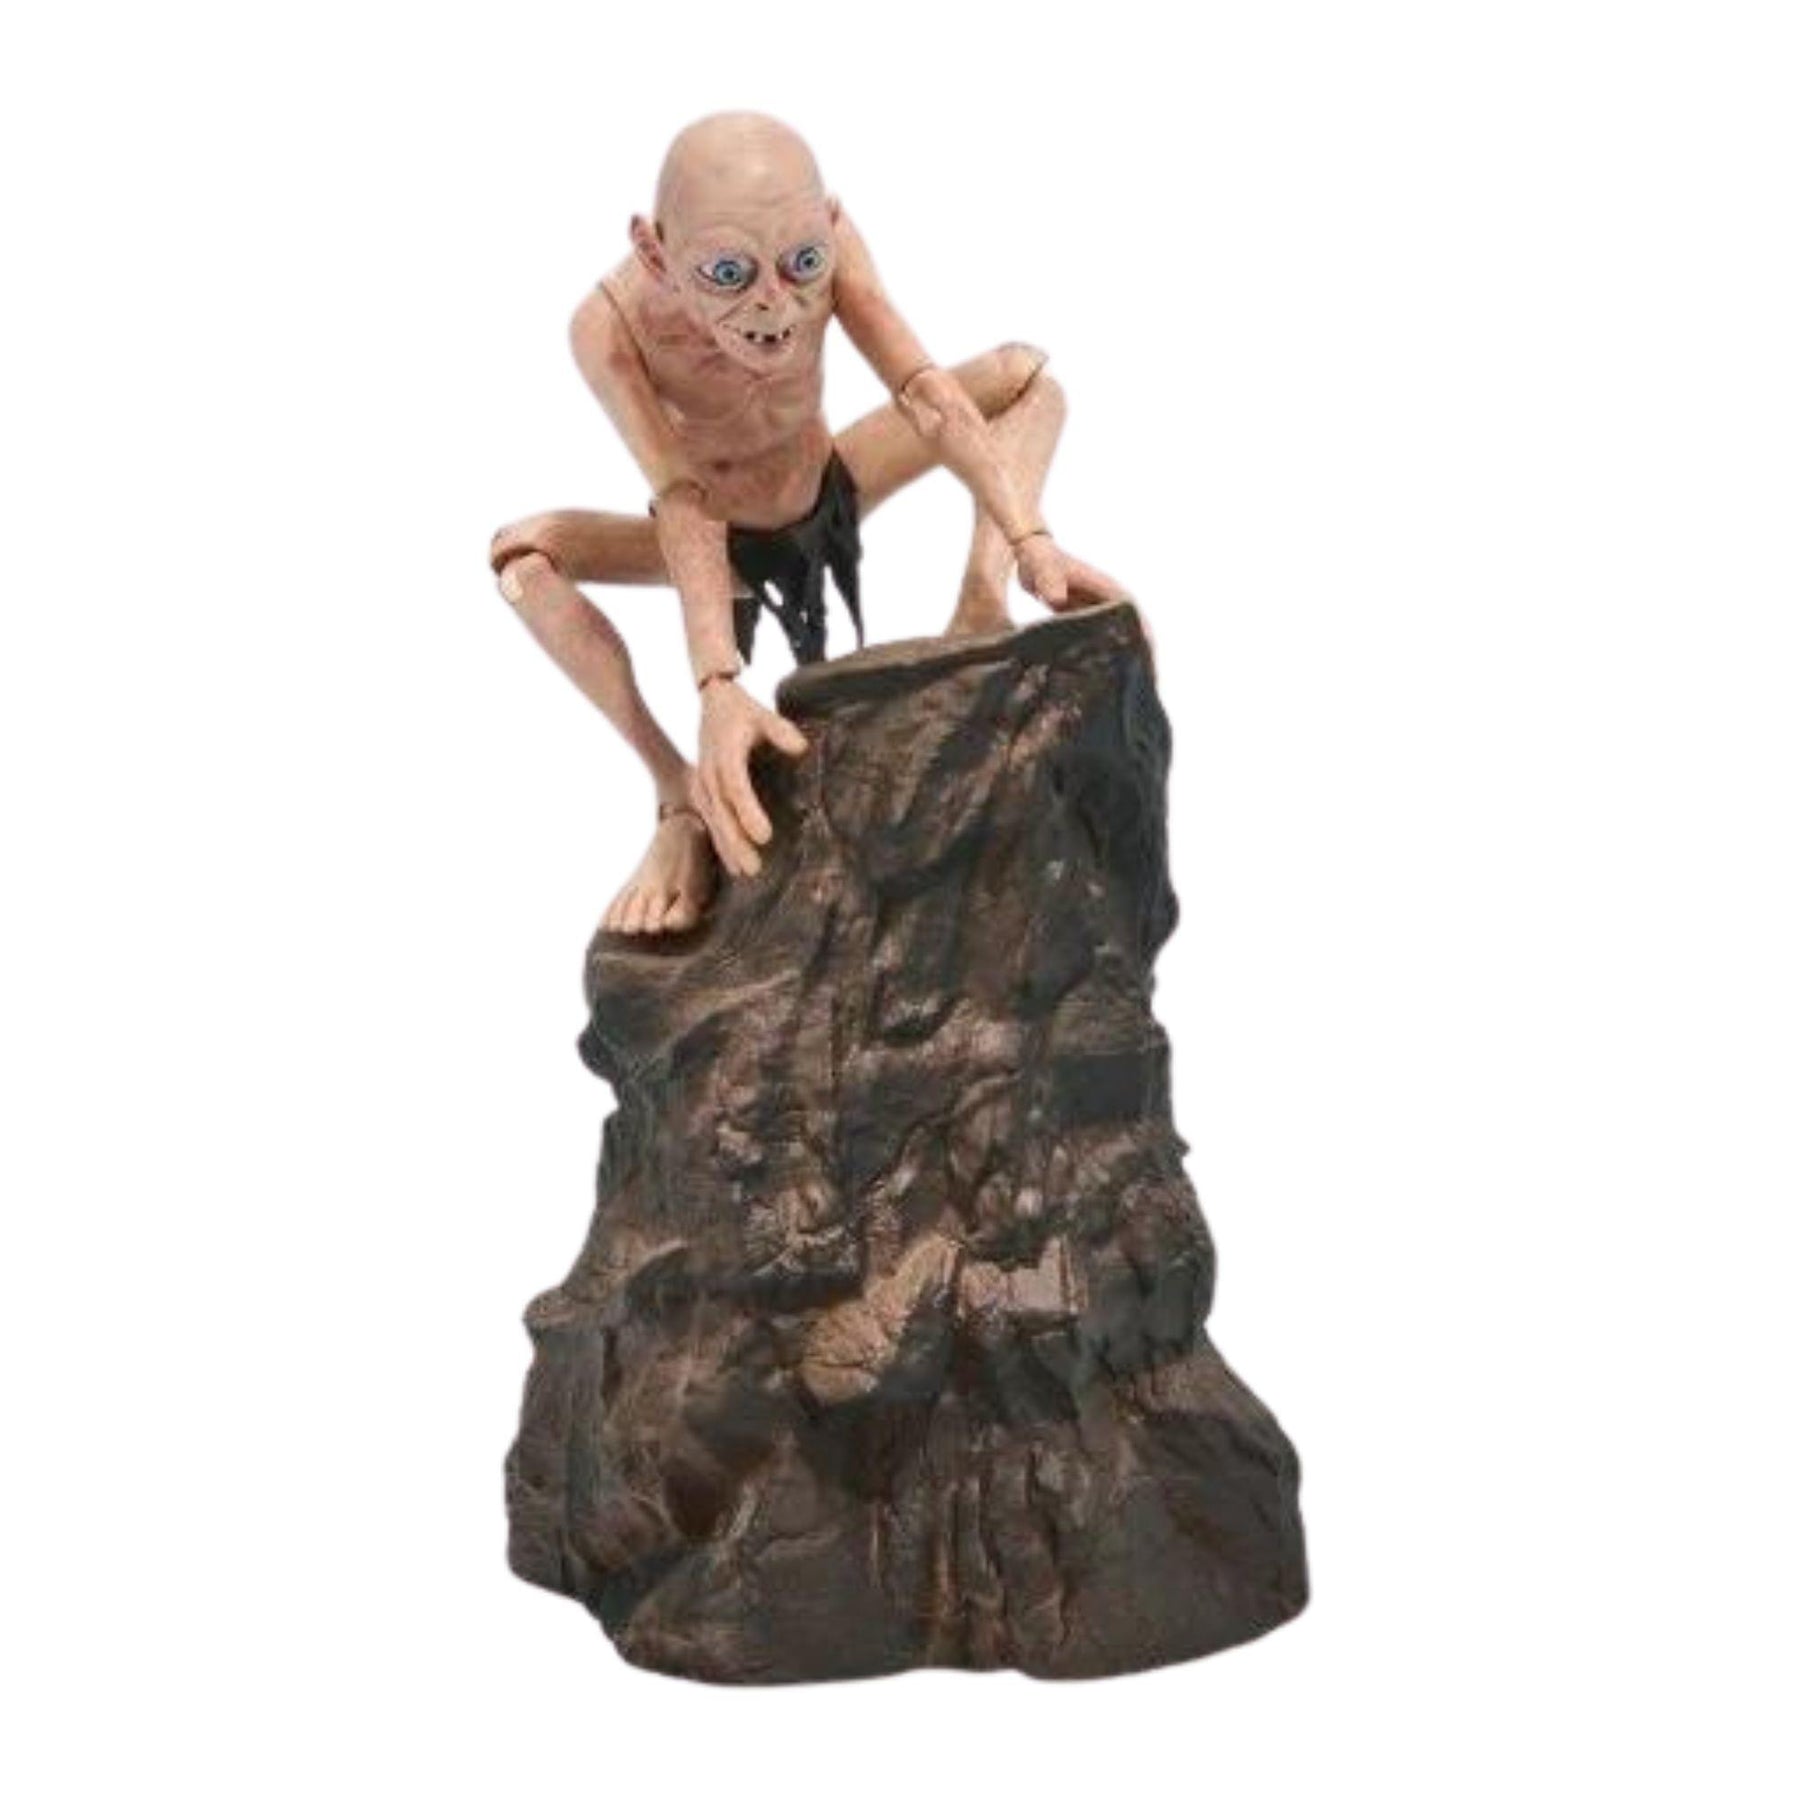 Lord Of The Rings Deluxe Gollum Action Figure